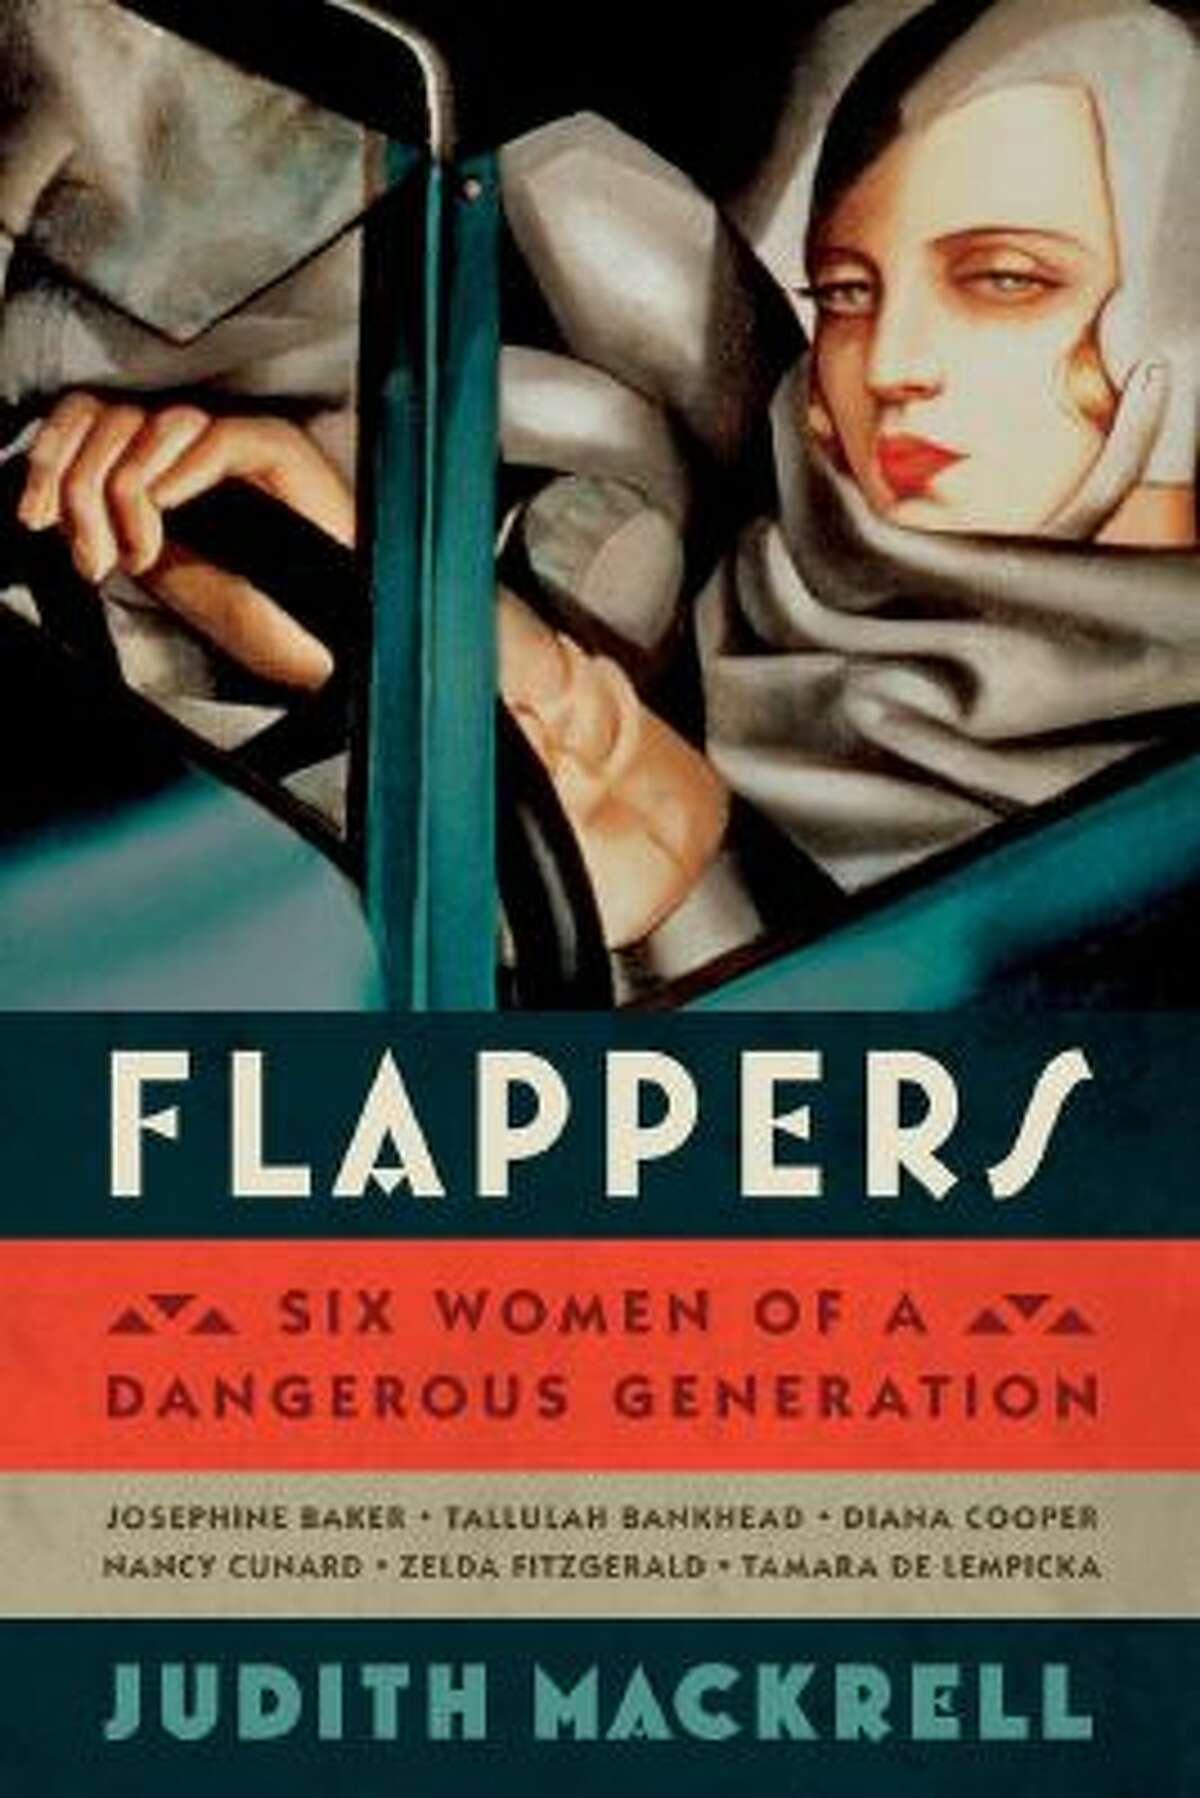 Six highly visible women form the core of ?Flappers: Six Women of a Dangerous Generation.?